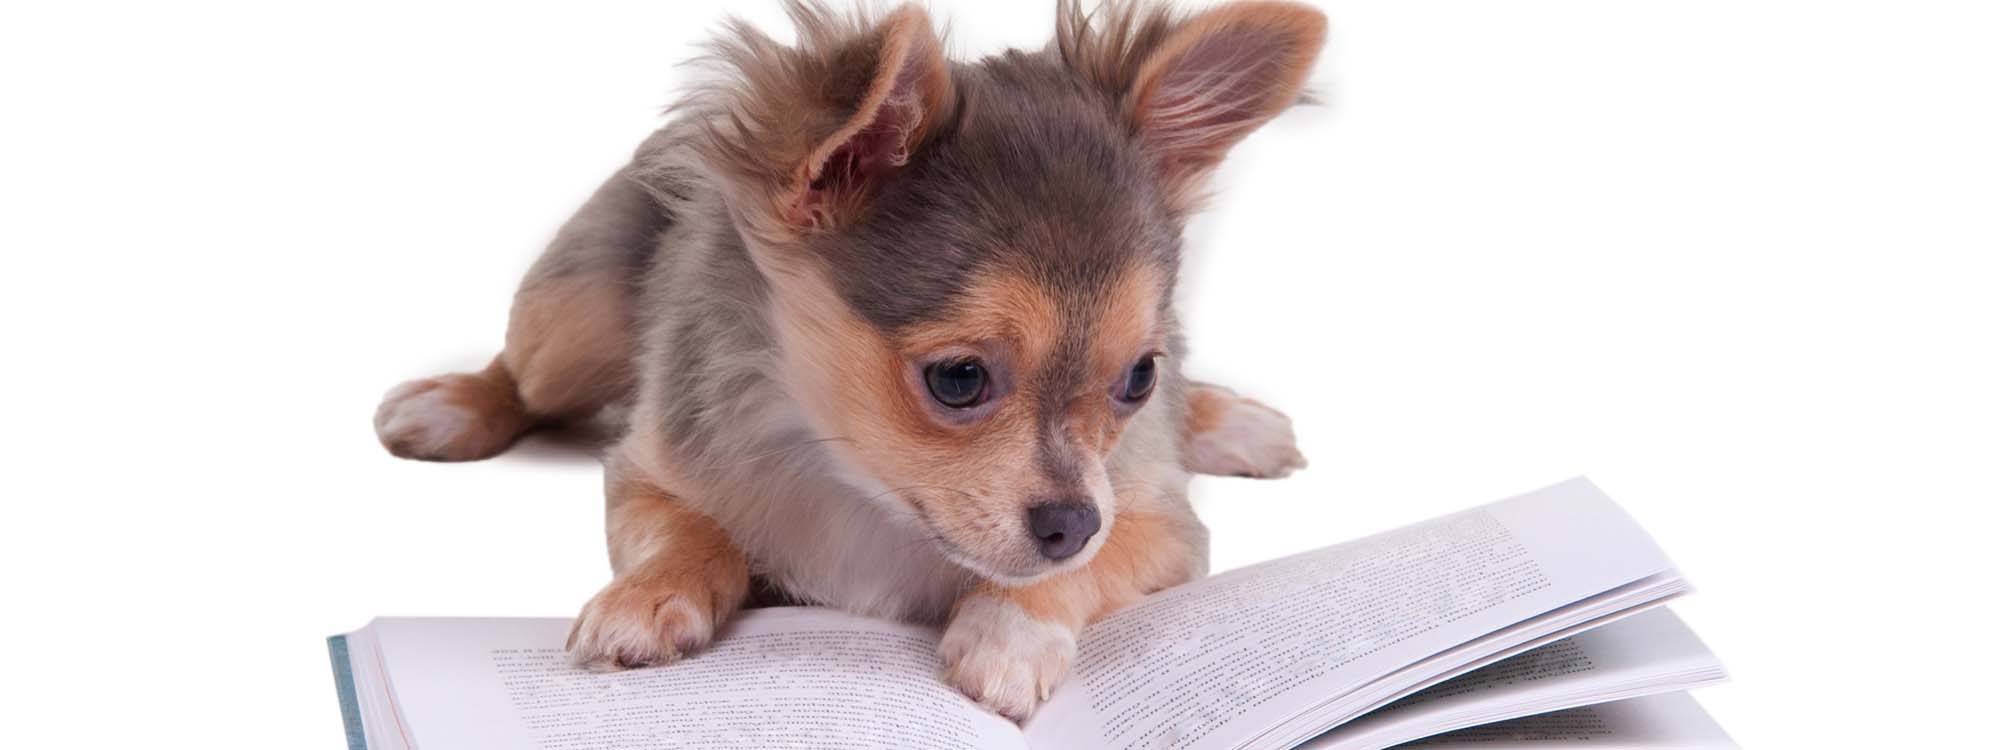 Puppy looking at book